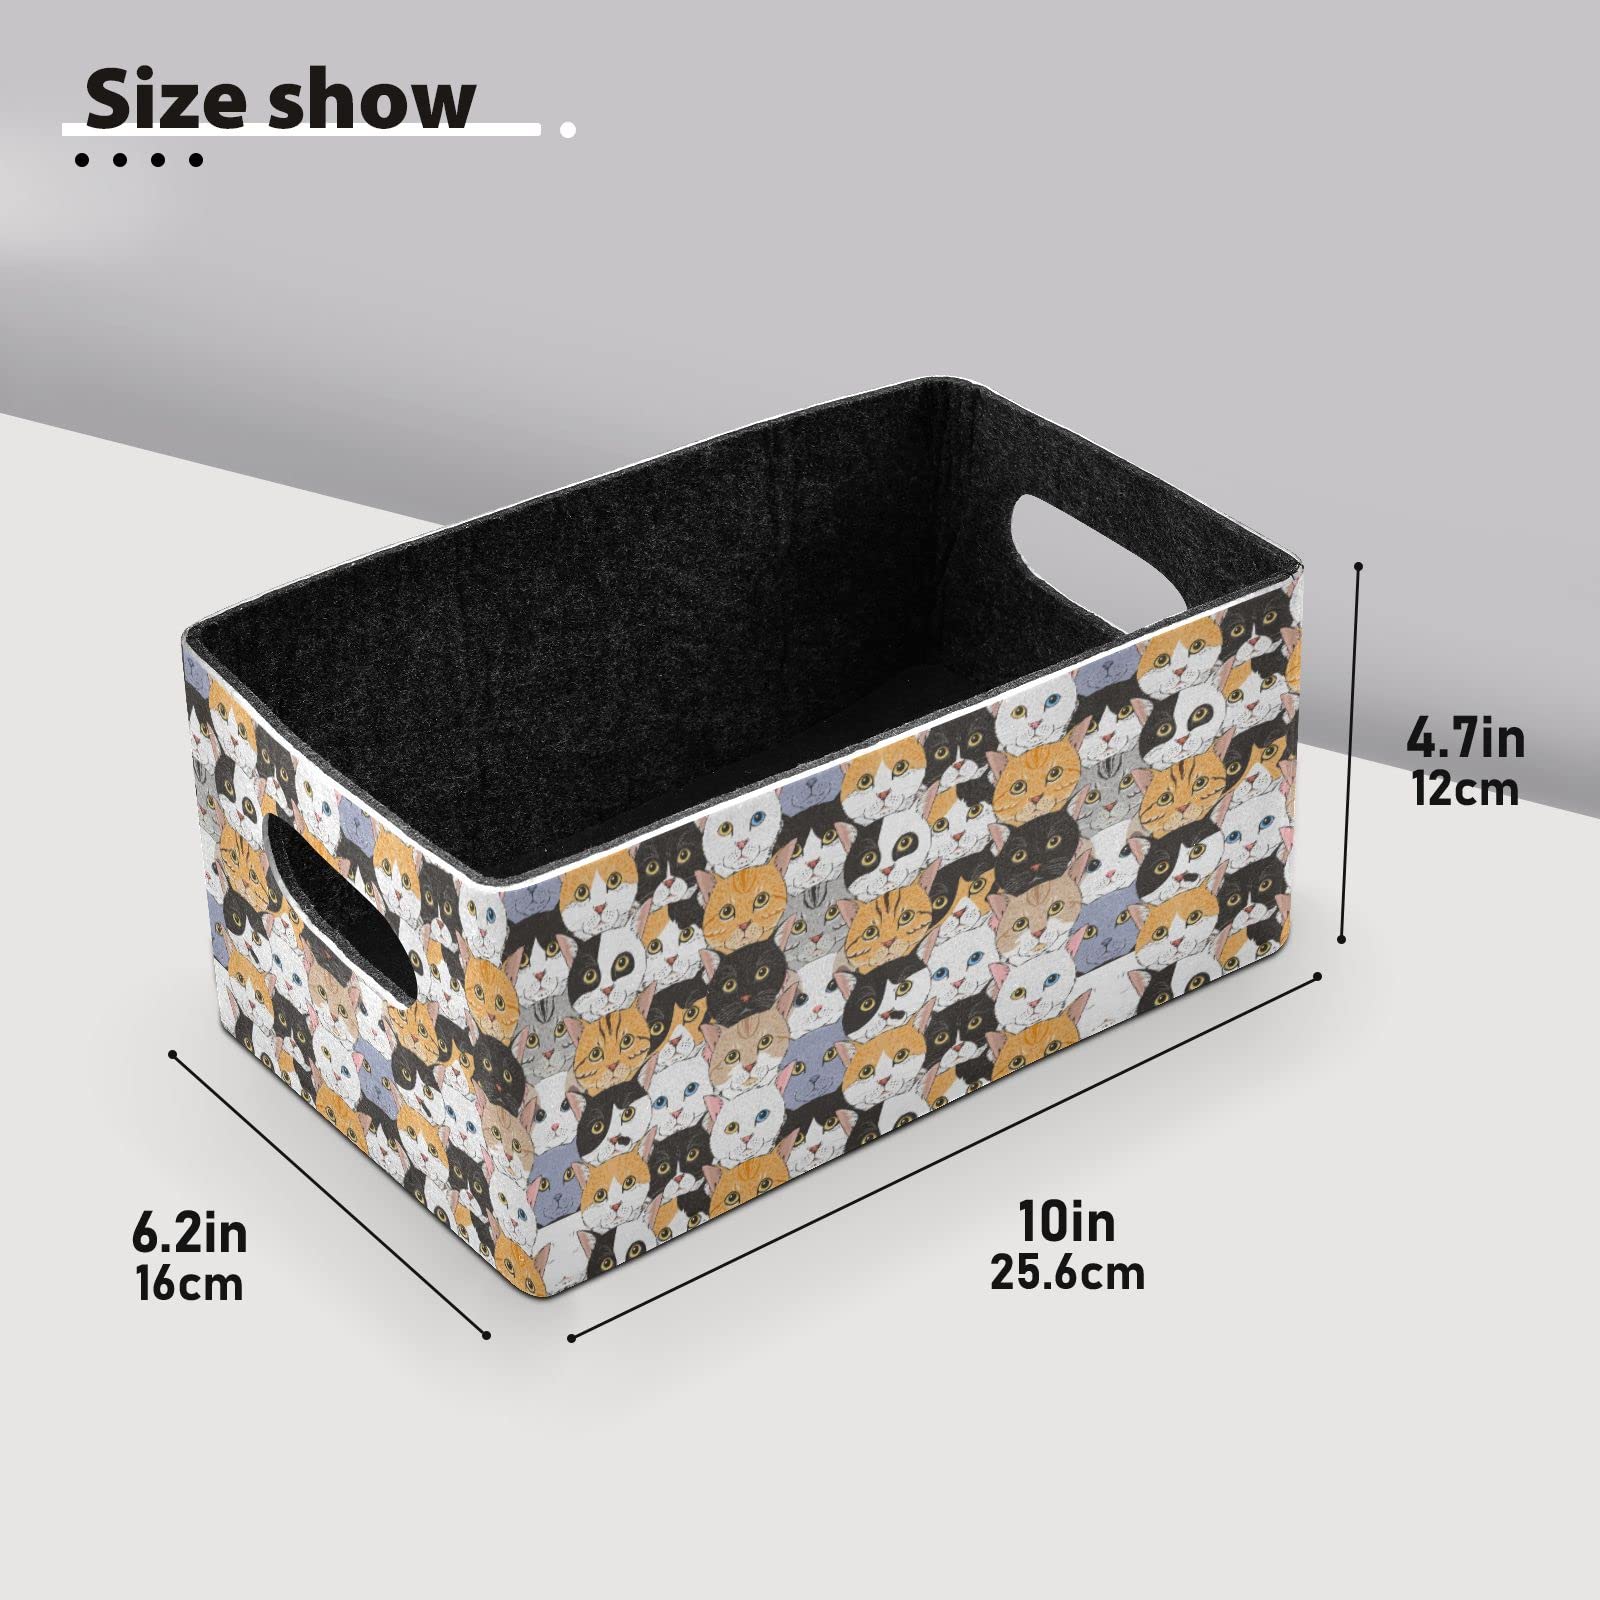 Emelivor Cute Cats Storage Basket Bins Set (2pcs) Felt Collapsible Storage Bins with Fabric Rectangle Baskets for Organizing for Kids Toys Pet Toy Books Clothes Closet Cabinet Organise